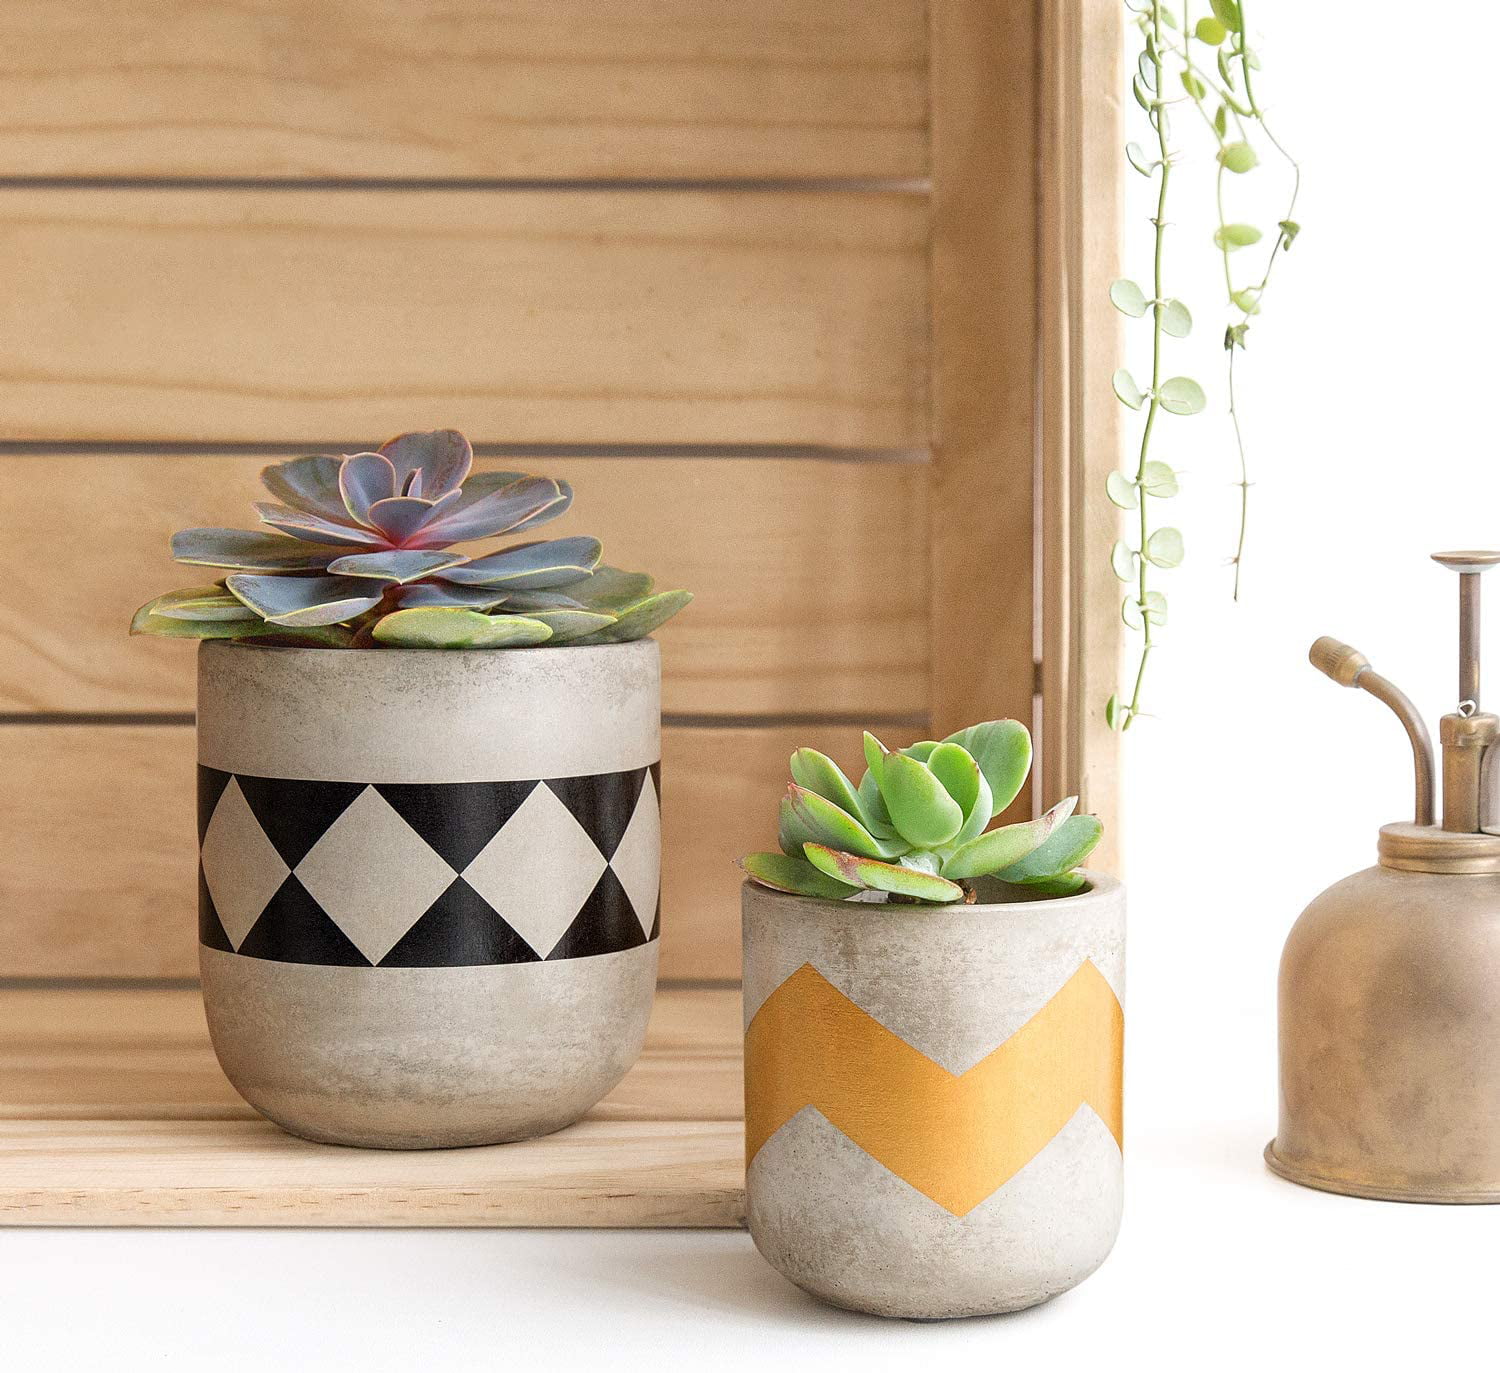 PASENITY Hand Painted Concrete Plant Pots Plants NOT Included Office & Home Gift Idea for Women Best Planters for Cactus Herbs Set of 3 Small Modern Cement Succulent Pots with Drainage 3.5 Inch 